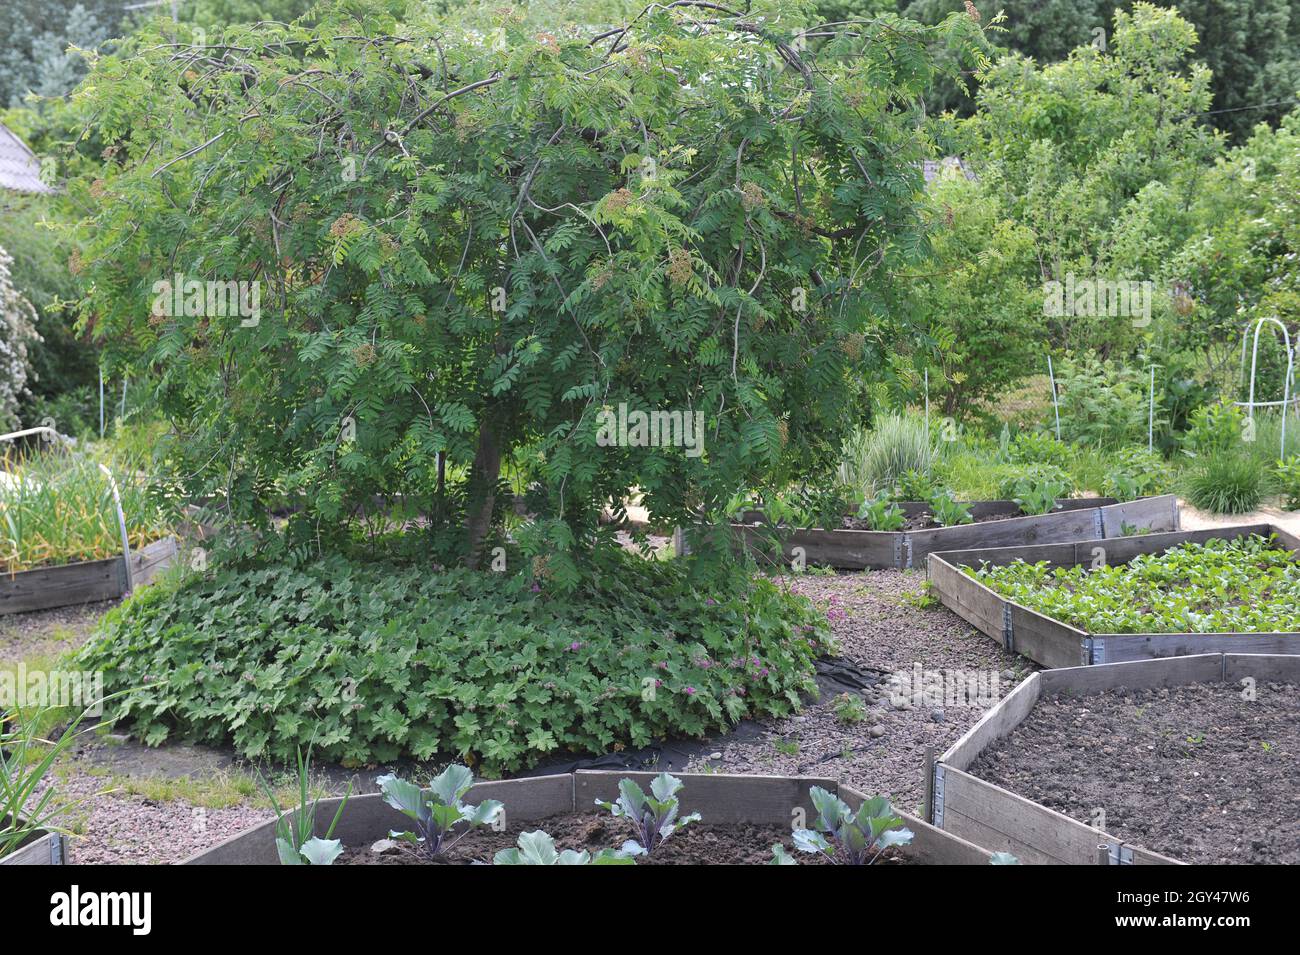 Weeping European mountain ash (Sorbus aucuparia Pendula) grows in a middle of a vegetable garden with raised beds in a garden in May Stock Photo